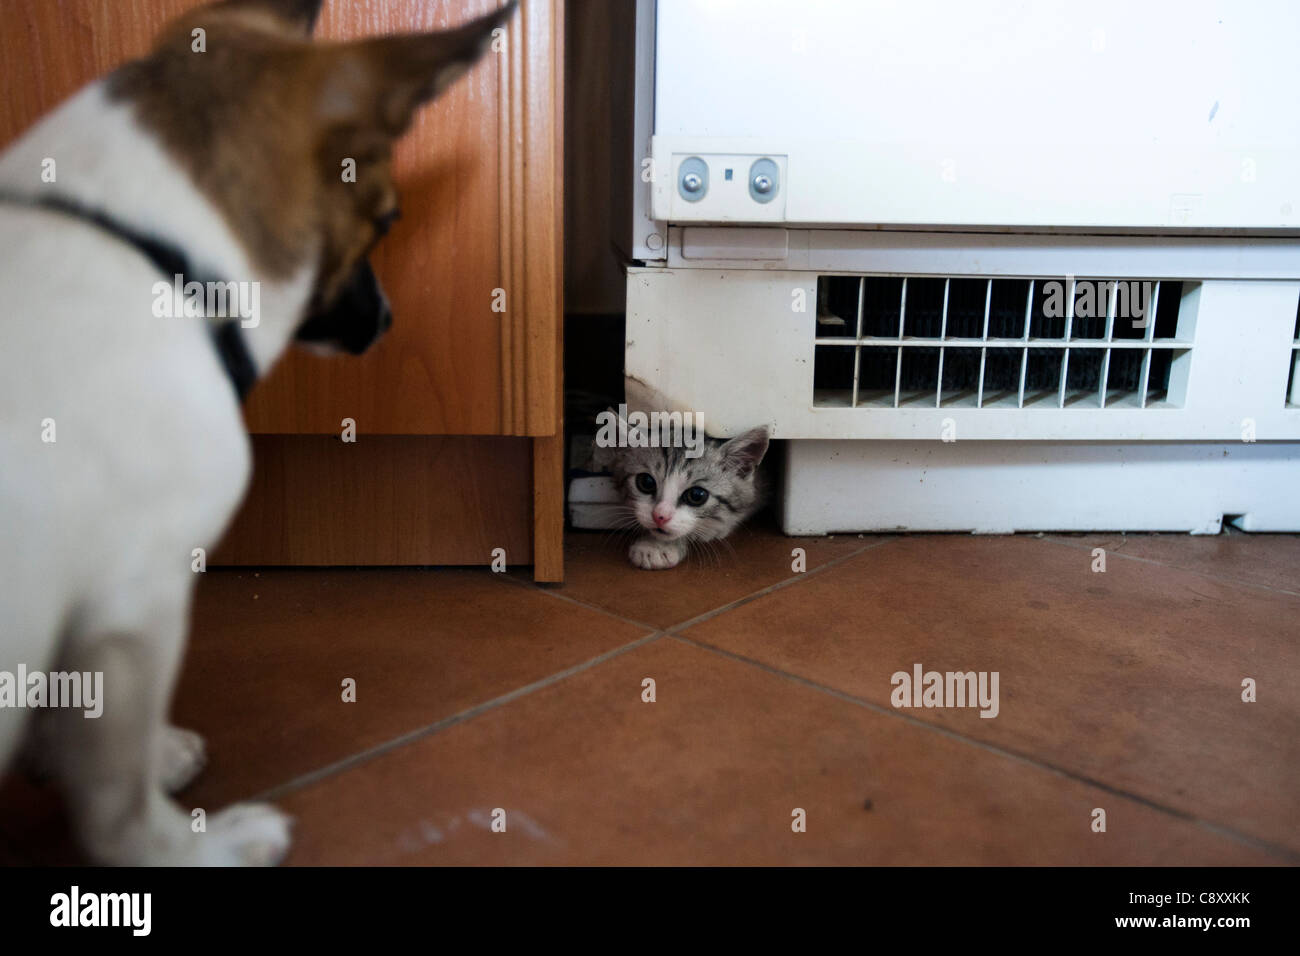 Dog waiting for a cat to come out Stock Photo